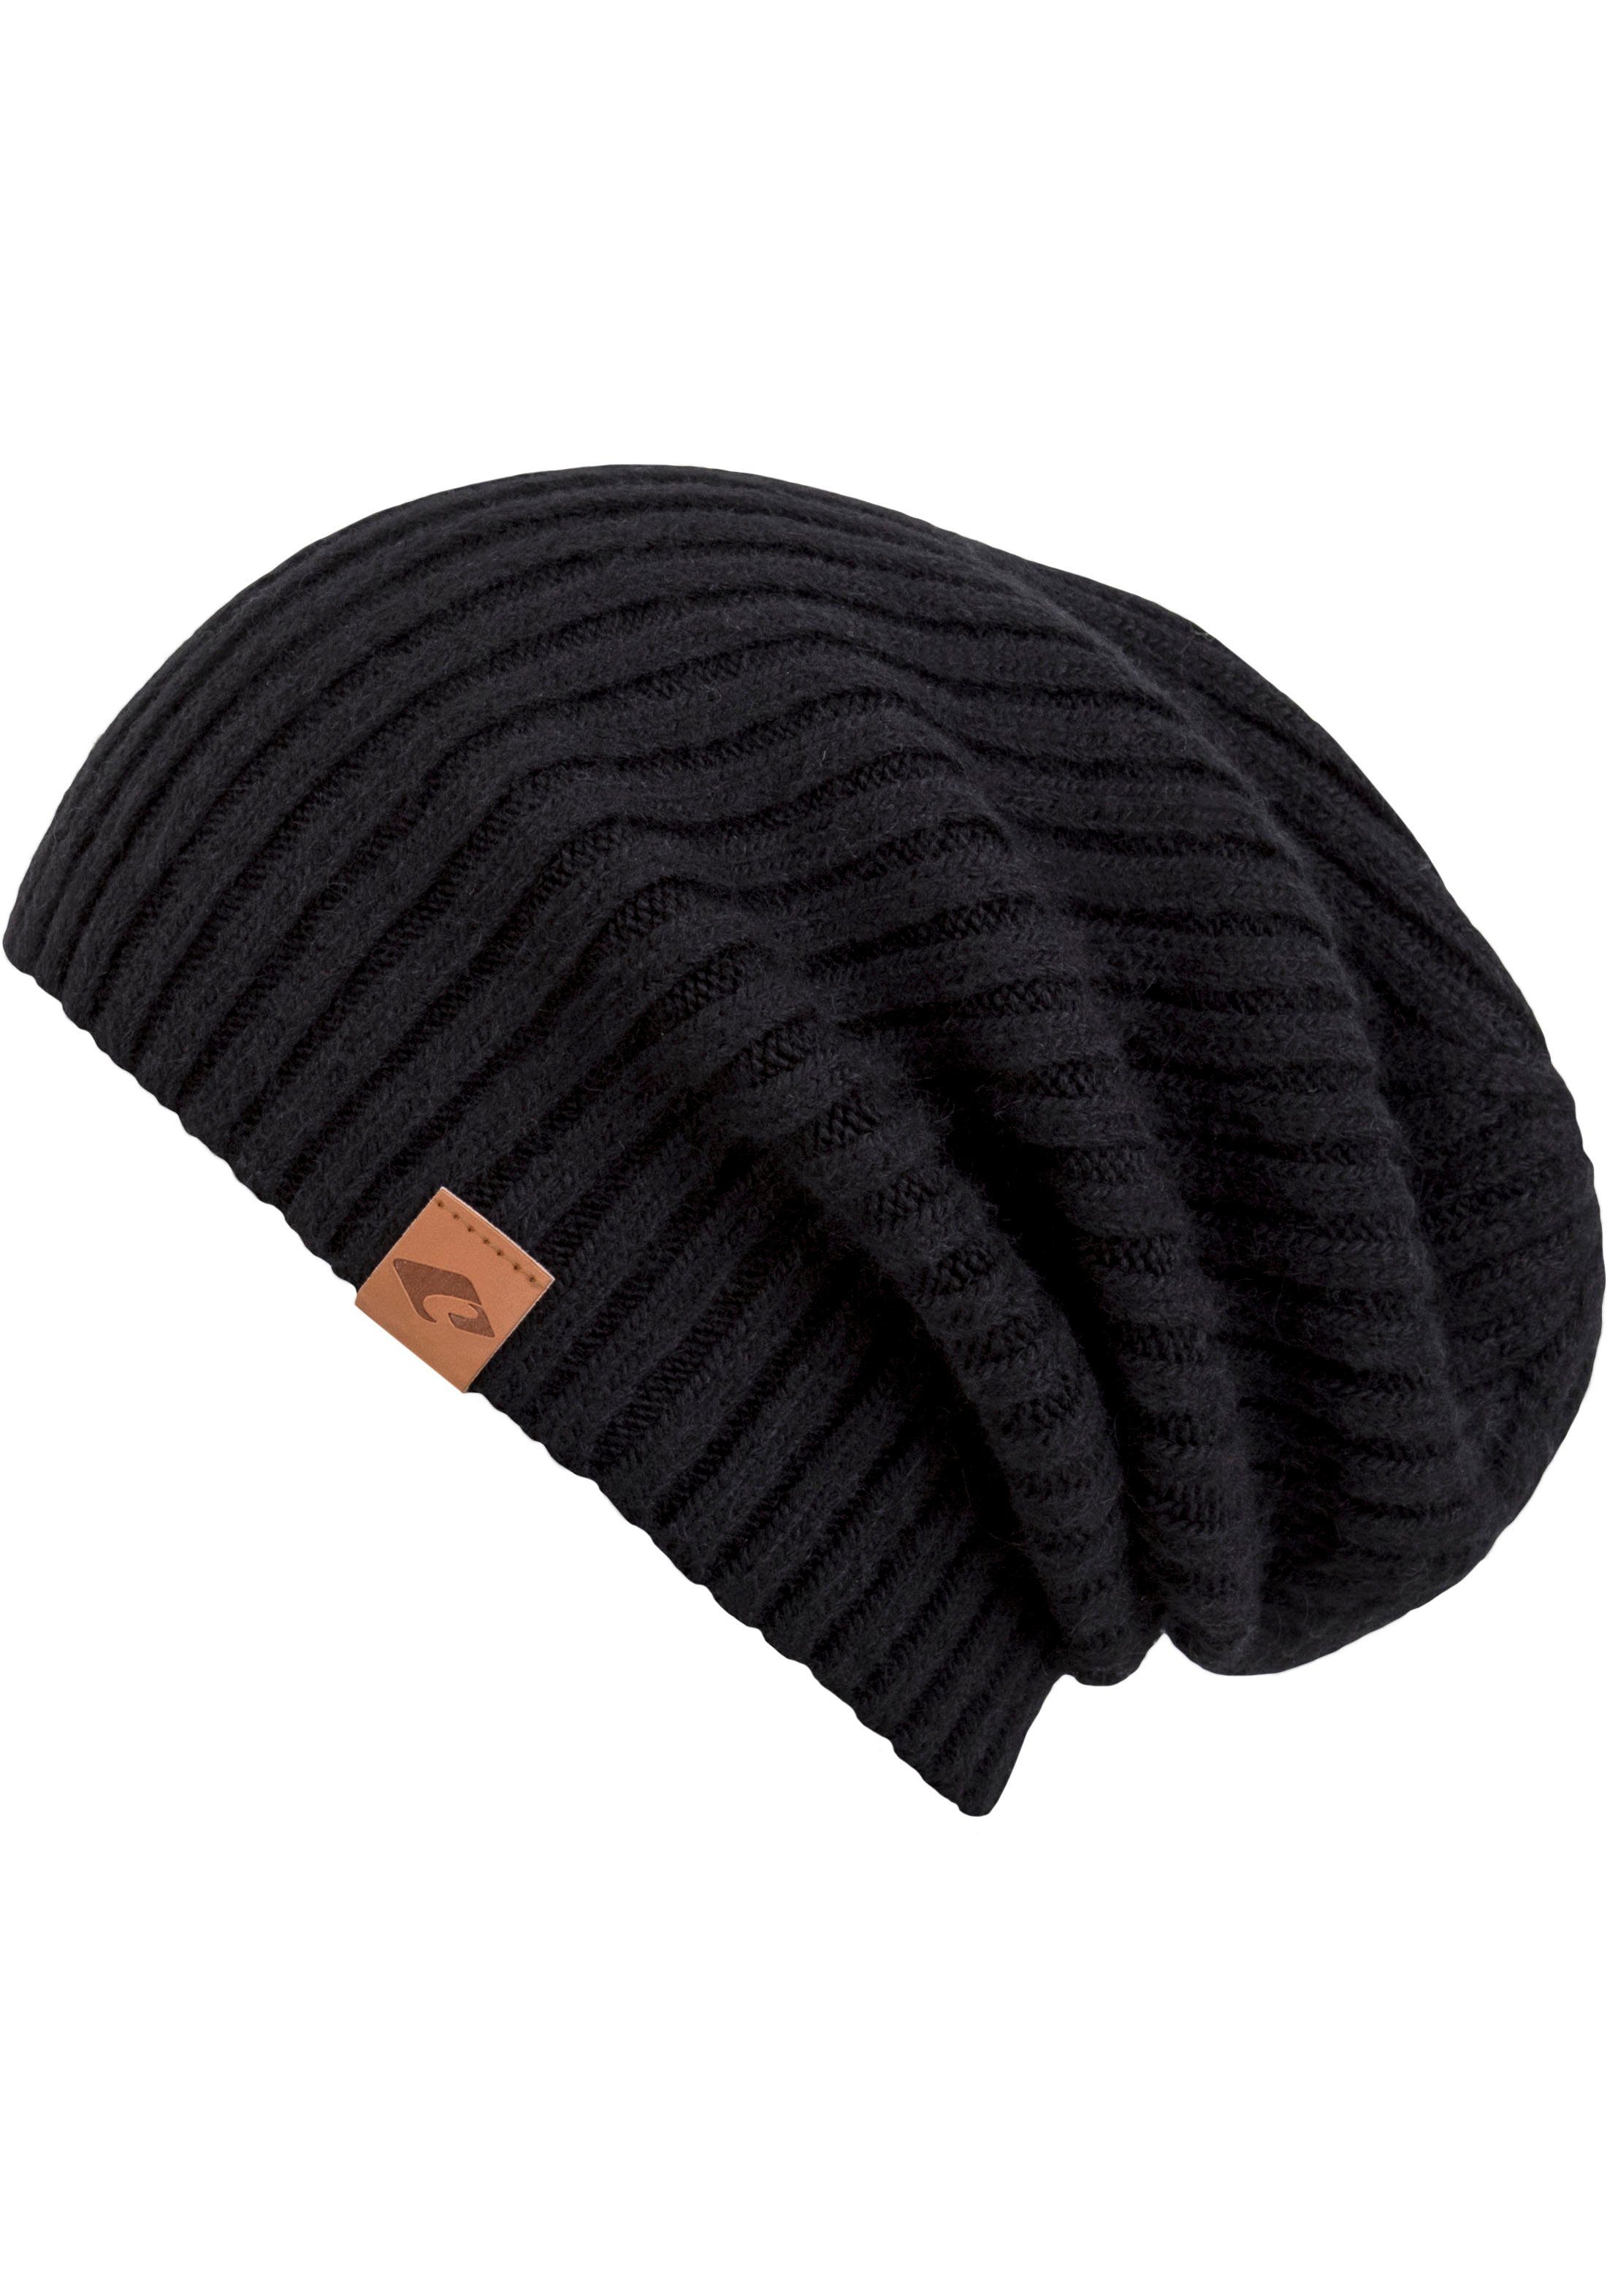 ca. One flexibel ( chillouts Size Beanie Justin Hat, 58-62 cm )